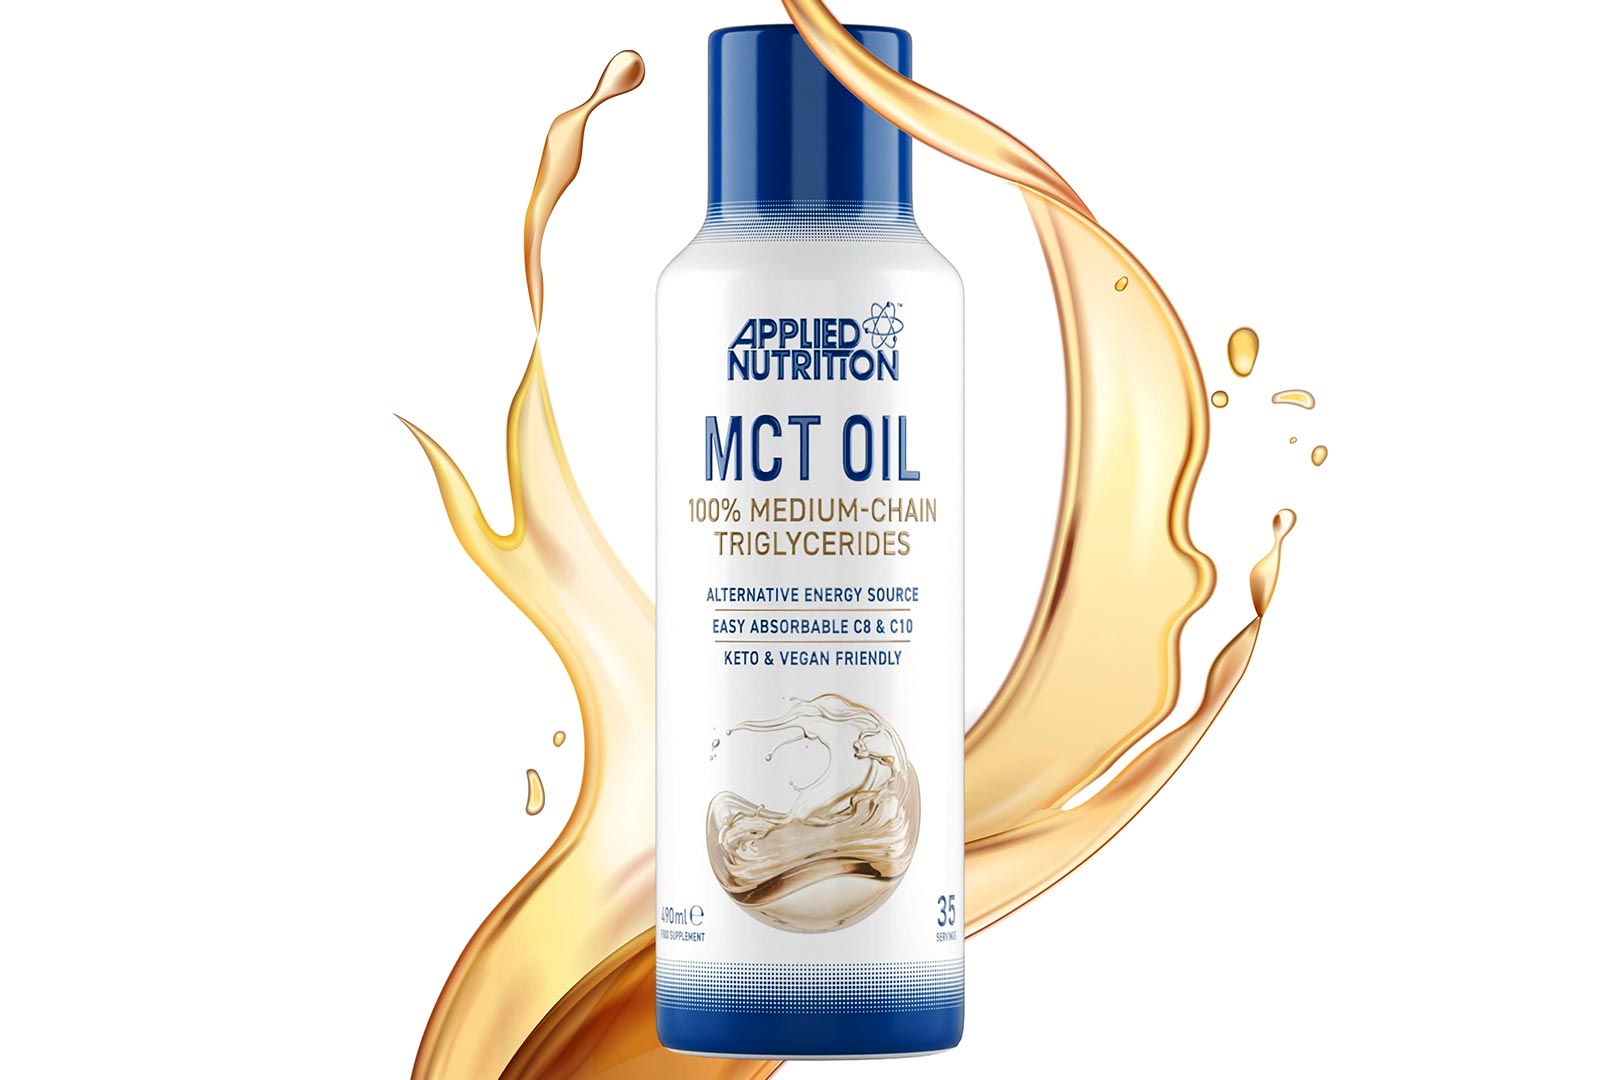 Applied Nutrition Mct Oil